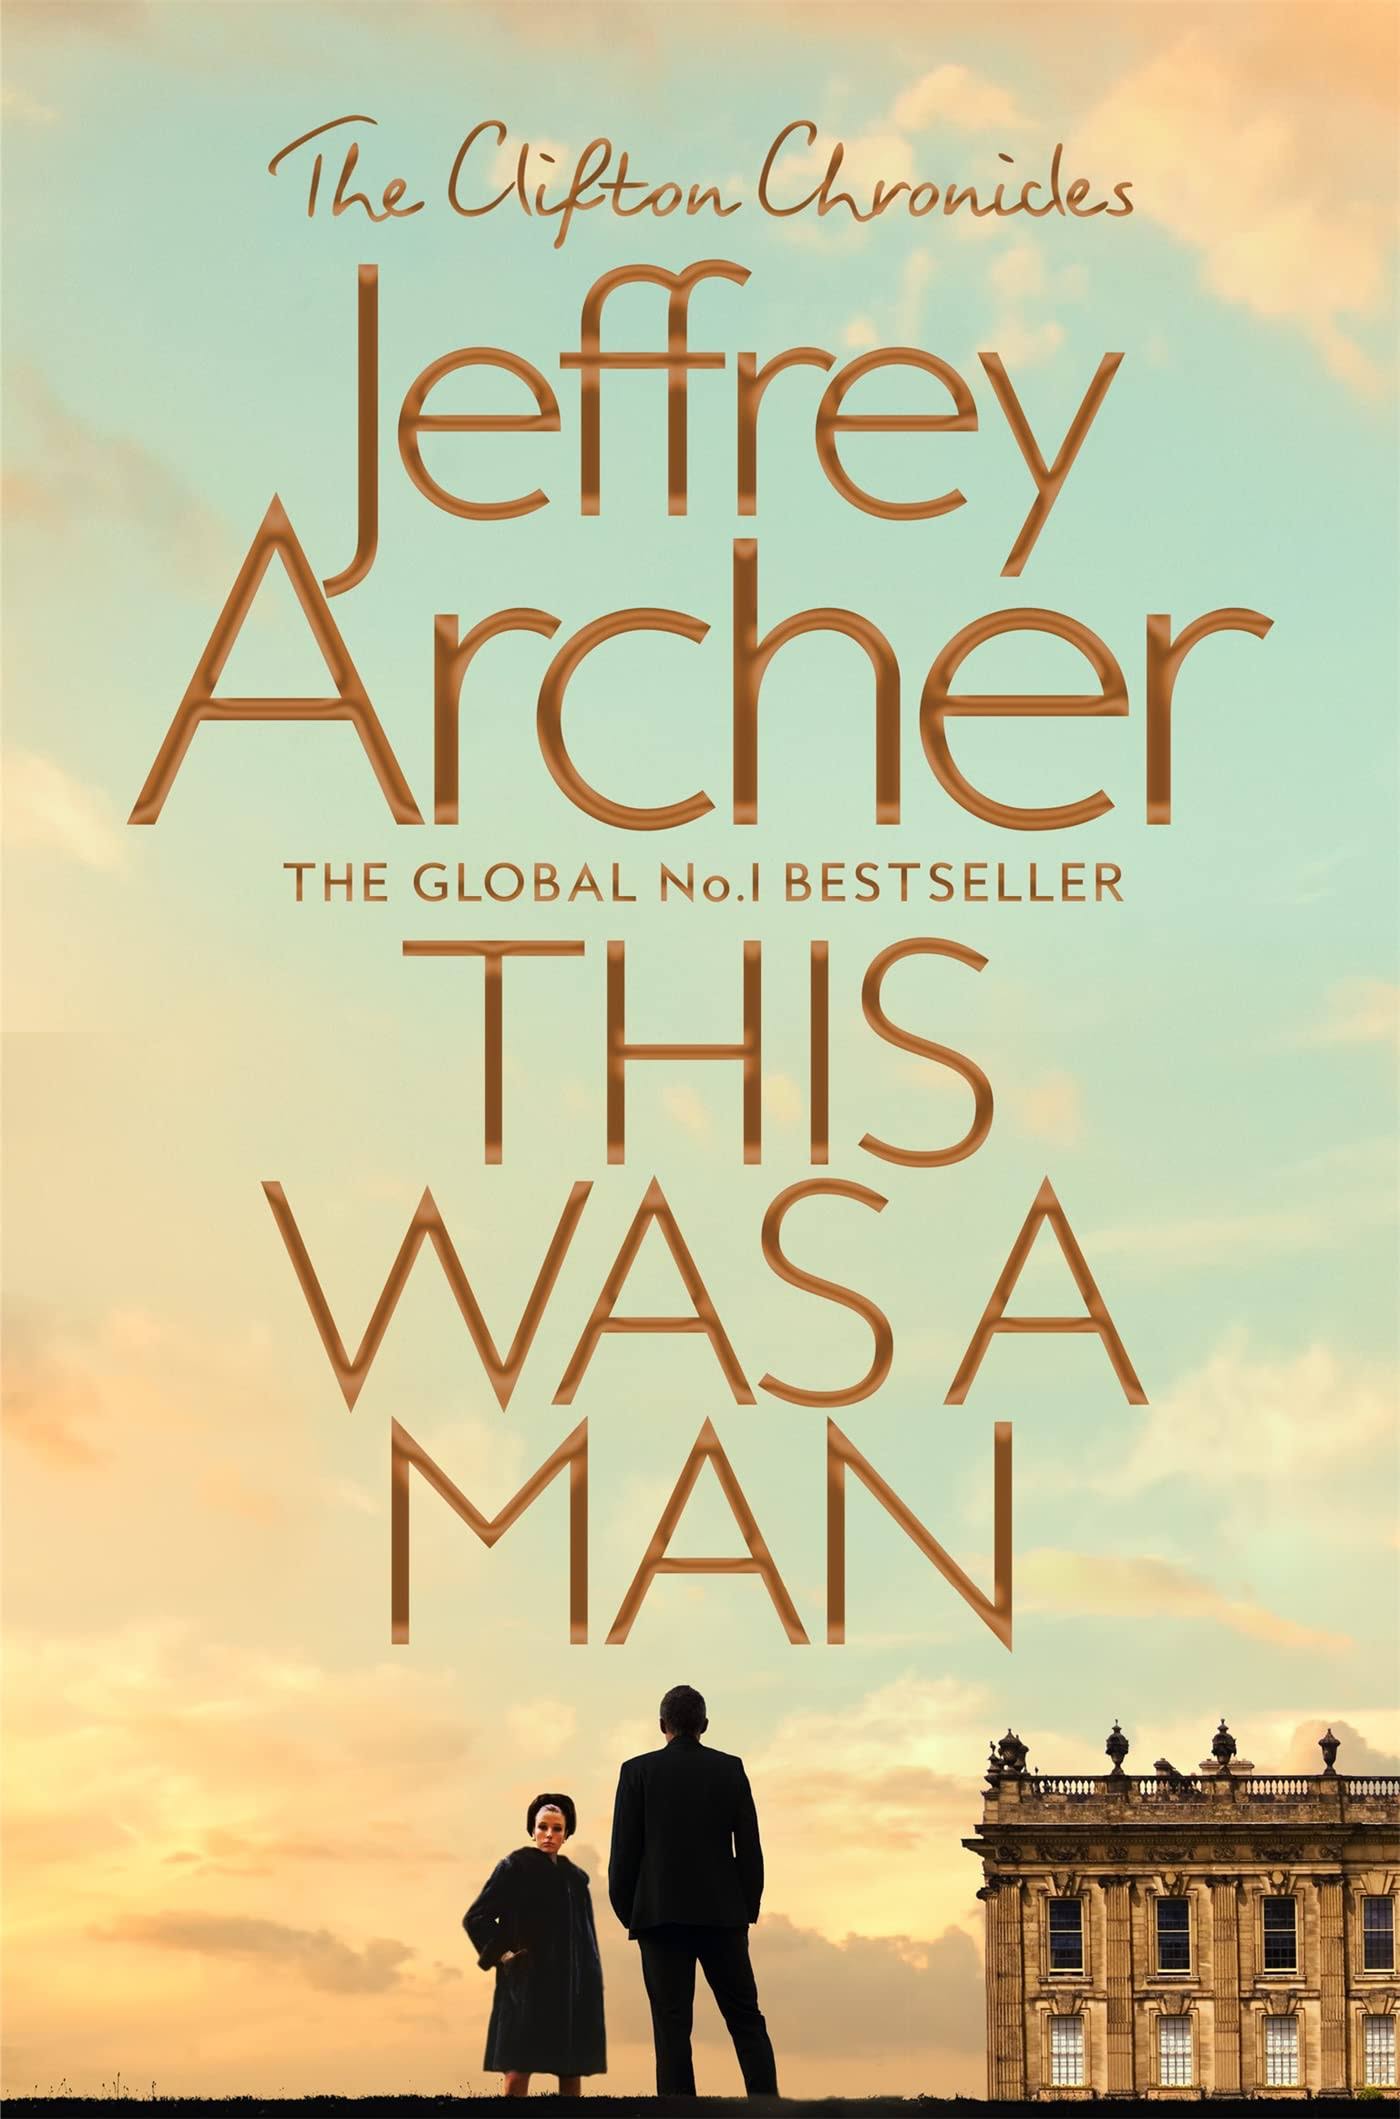 This Was A Man by Jeffrey Archer